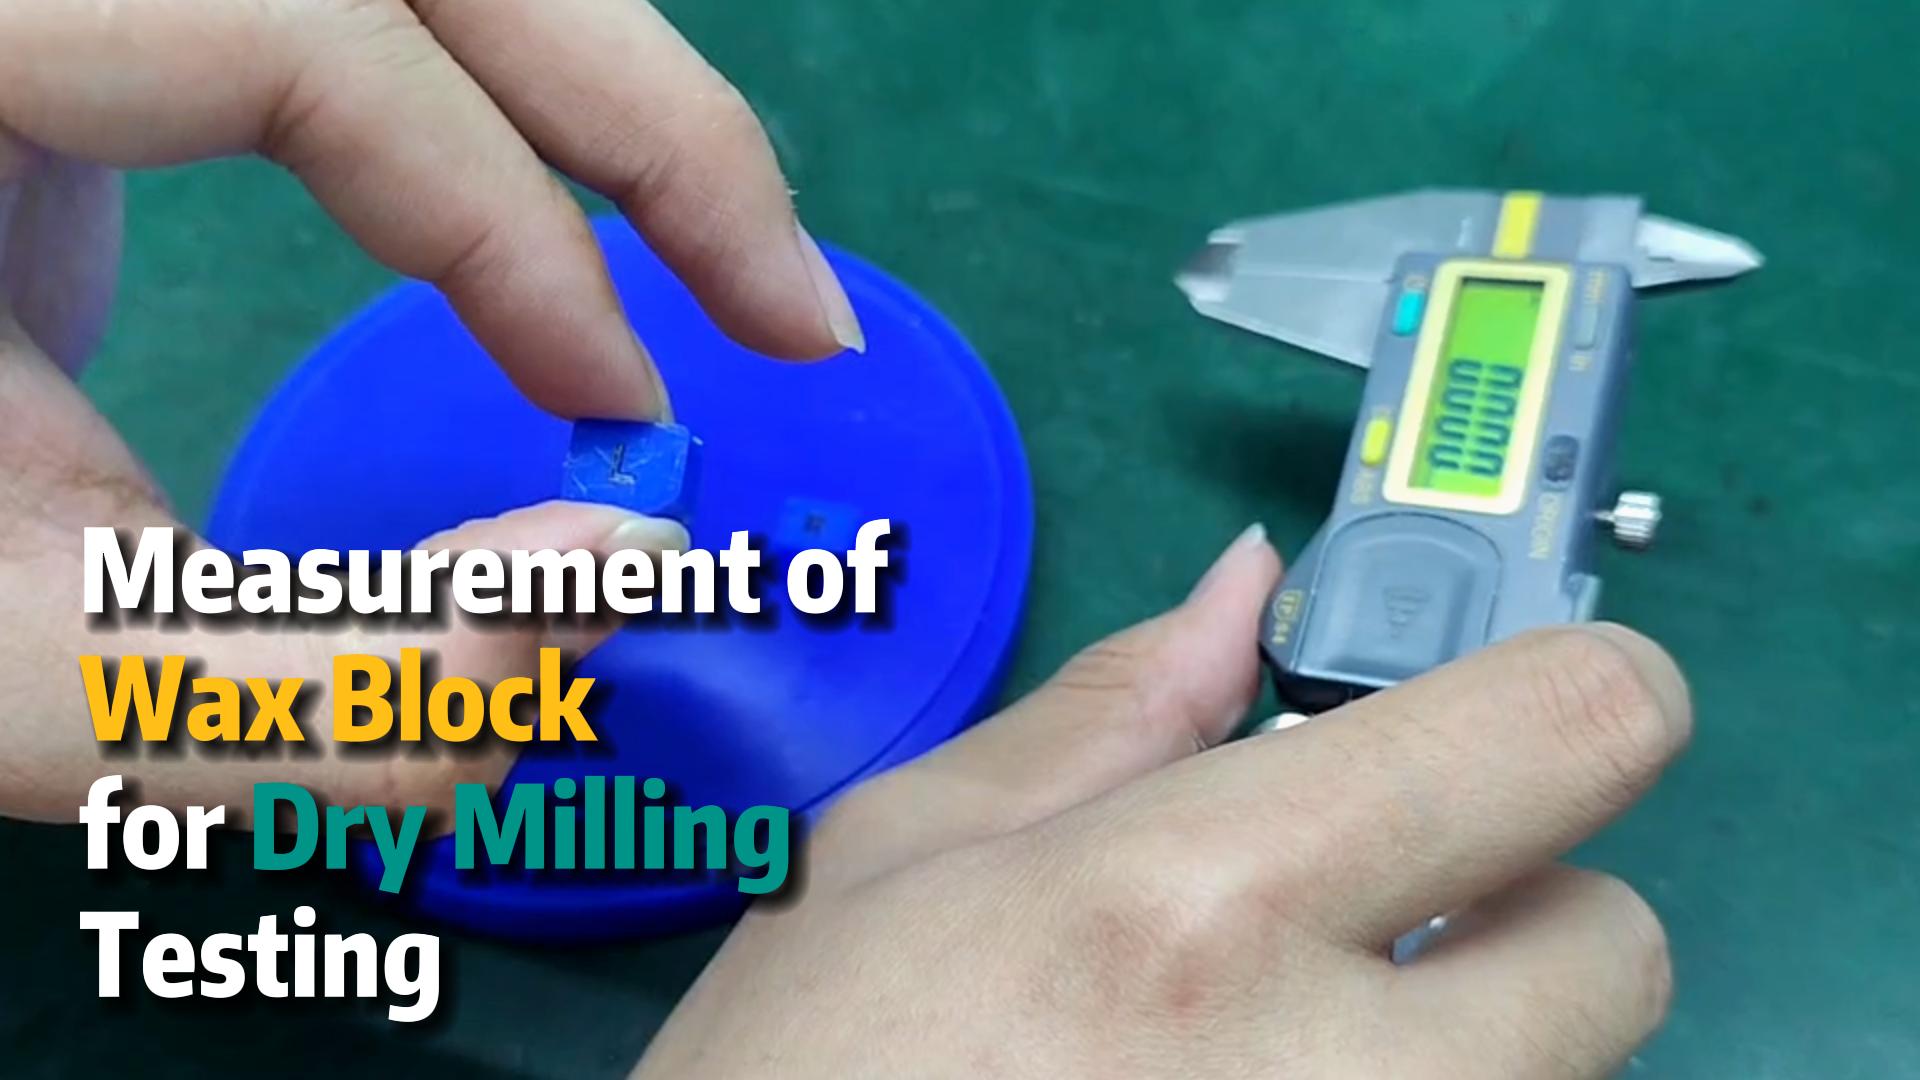 Wax Block Measurement for Dry Milling